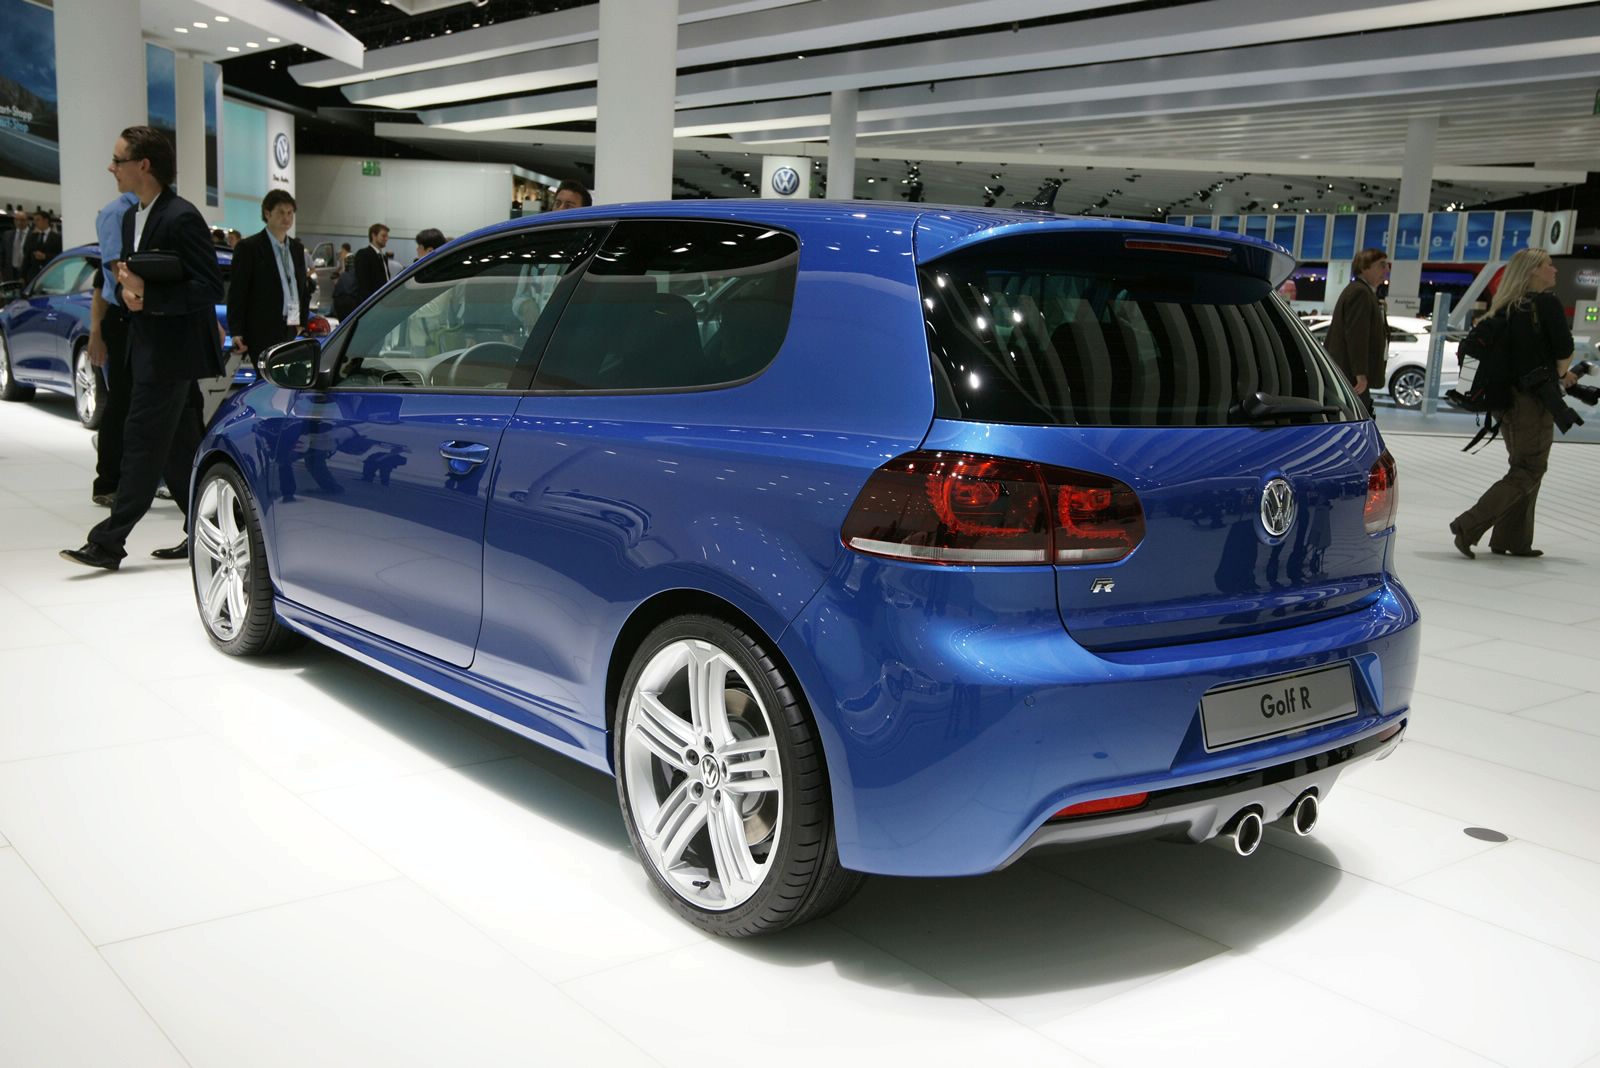 270 PS Volkswagen Golf R Mk6 2010 photo 51729 pictures at high .